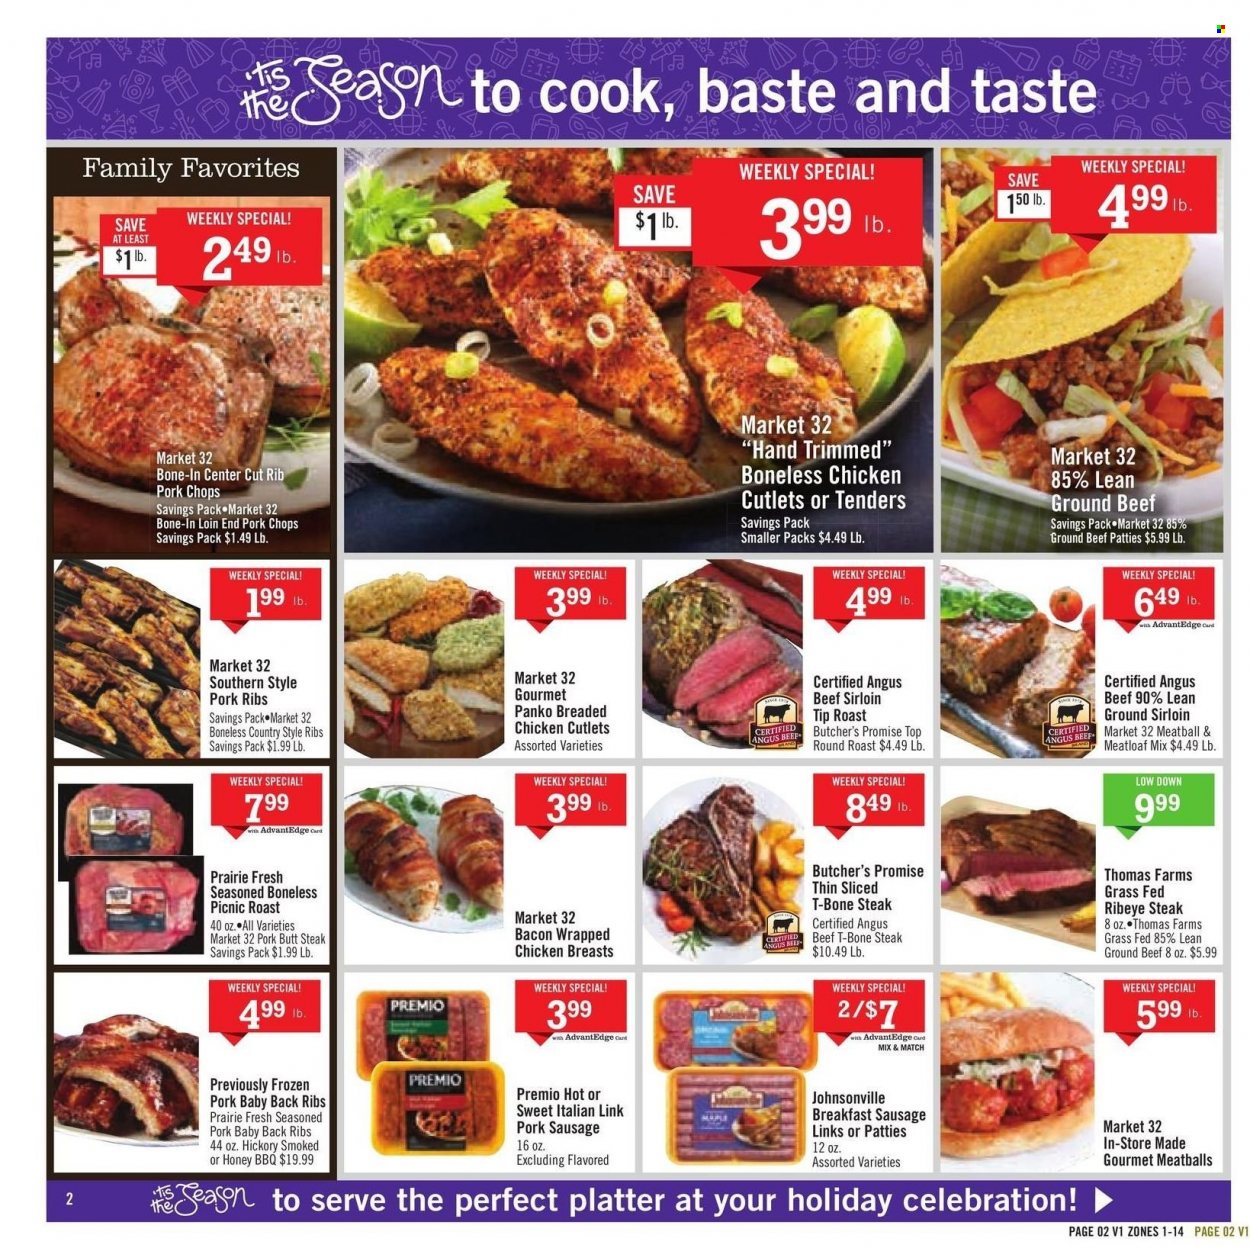 thumbnail - Price Chopper Flyer - 12/26/2021 - 01/01/2022 - Sales products - panko breadcrumbs, meatballs, fried chicken, meatloaf, bacon, Johnsonville, sausage, pork sausage, Celebration, beef meat, beef sirloin, beef steak, ground beef, t-bone steak, steak, round roast, ribeye steak, pork chops, pork meat, pork ribs, pork back ribs, country style ribs. Page 2.